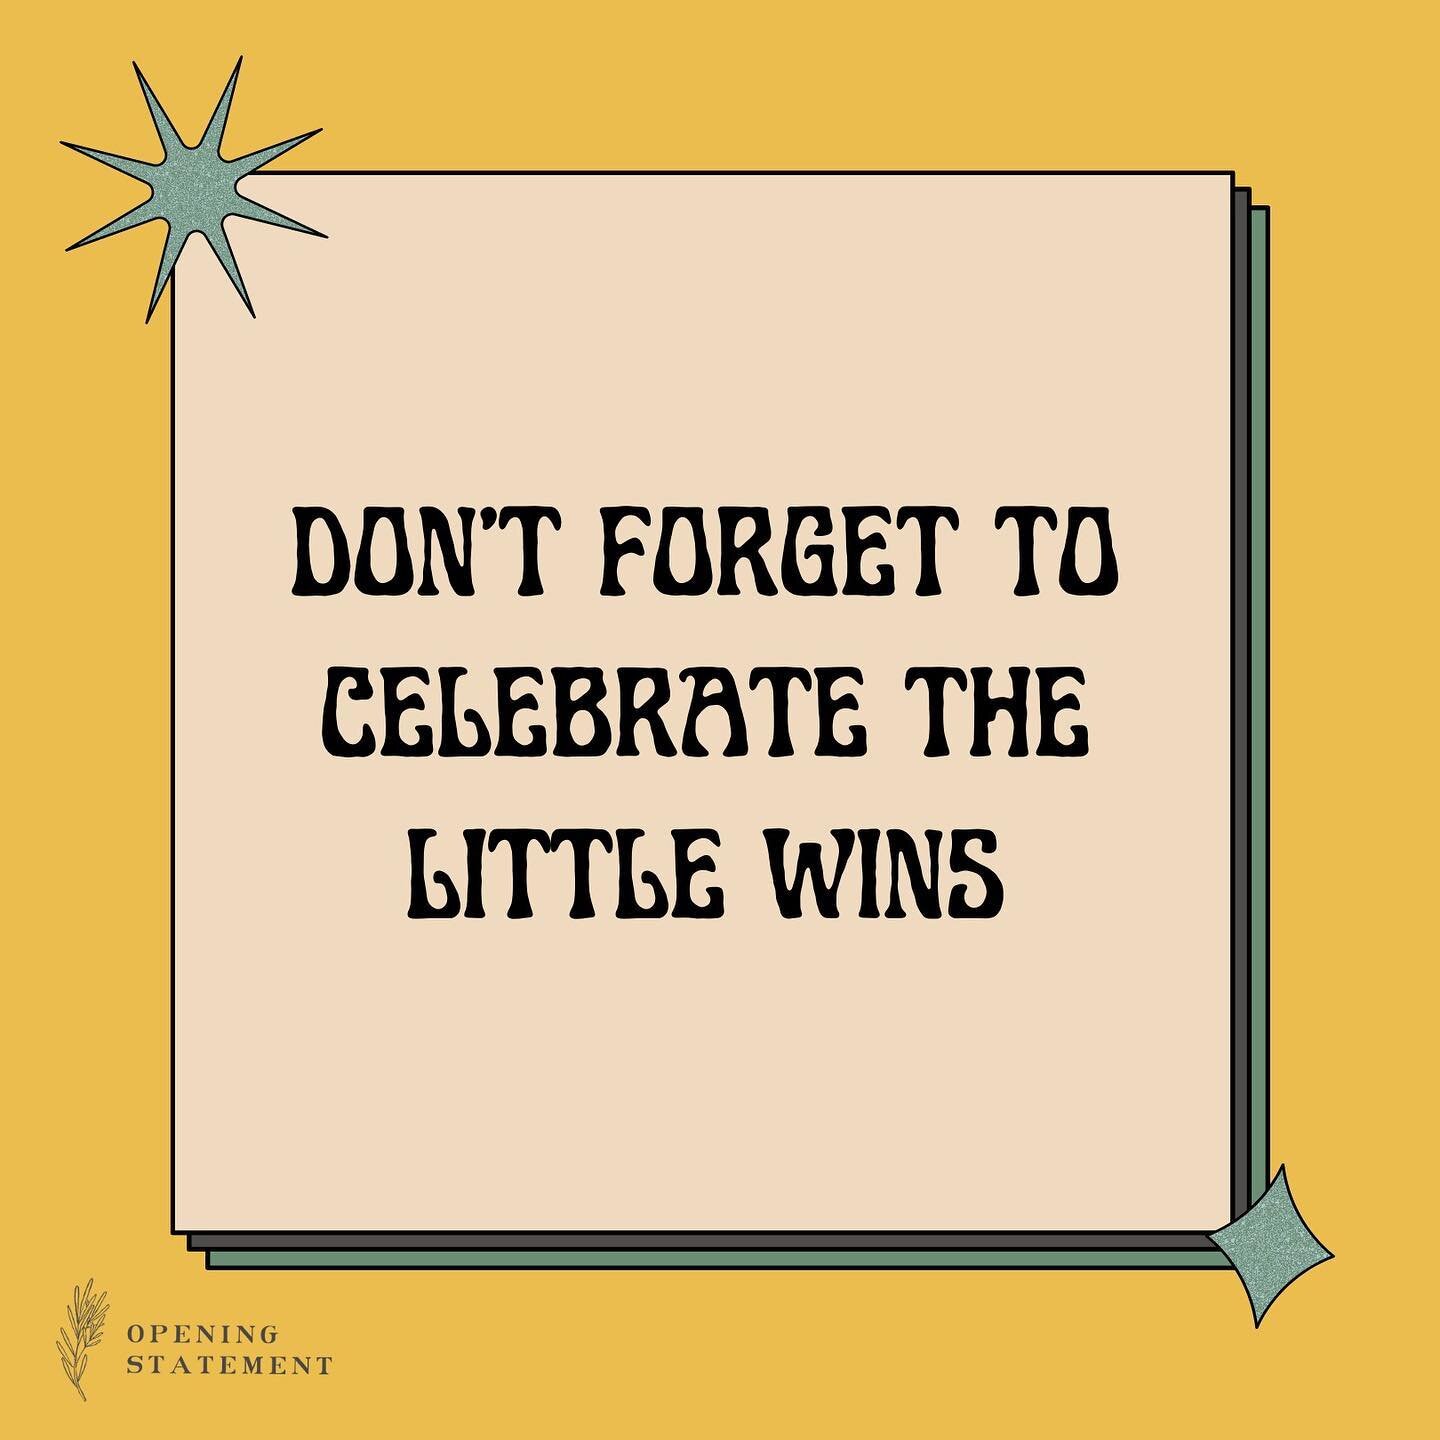 Congrats! You&rsquo;re halfway through the work week 🎉It might not seem like much, but given the week you&rsquo;ve had maybe it&rsquo;s just what you need to hear 😂

But in all seriousness&hellip;don&rsquo;t forget to celebrate the little wins! One